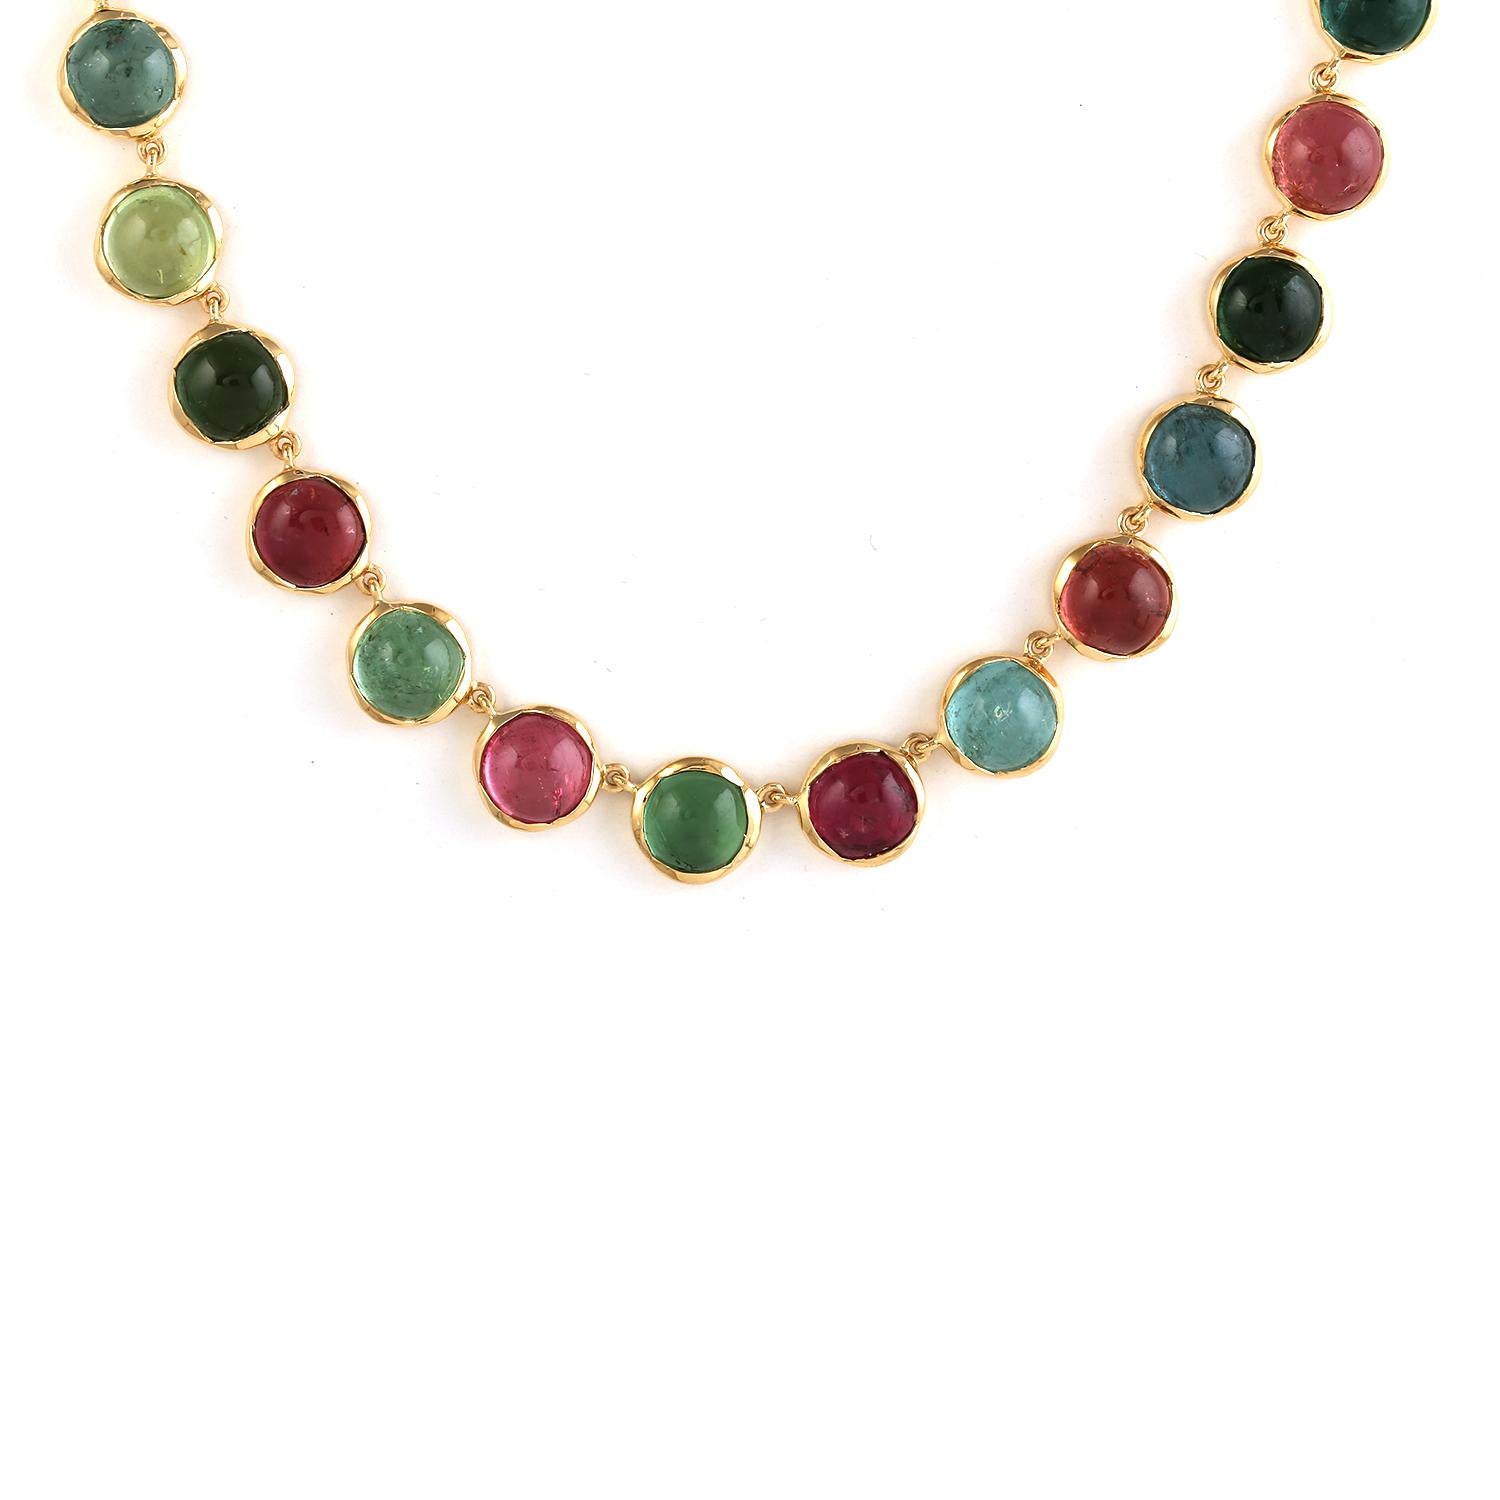 Contemporary 84.56 ct Multi Tourmaline Beads Necklace Made In 18k Yellow Gold For Sale